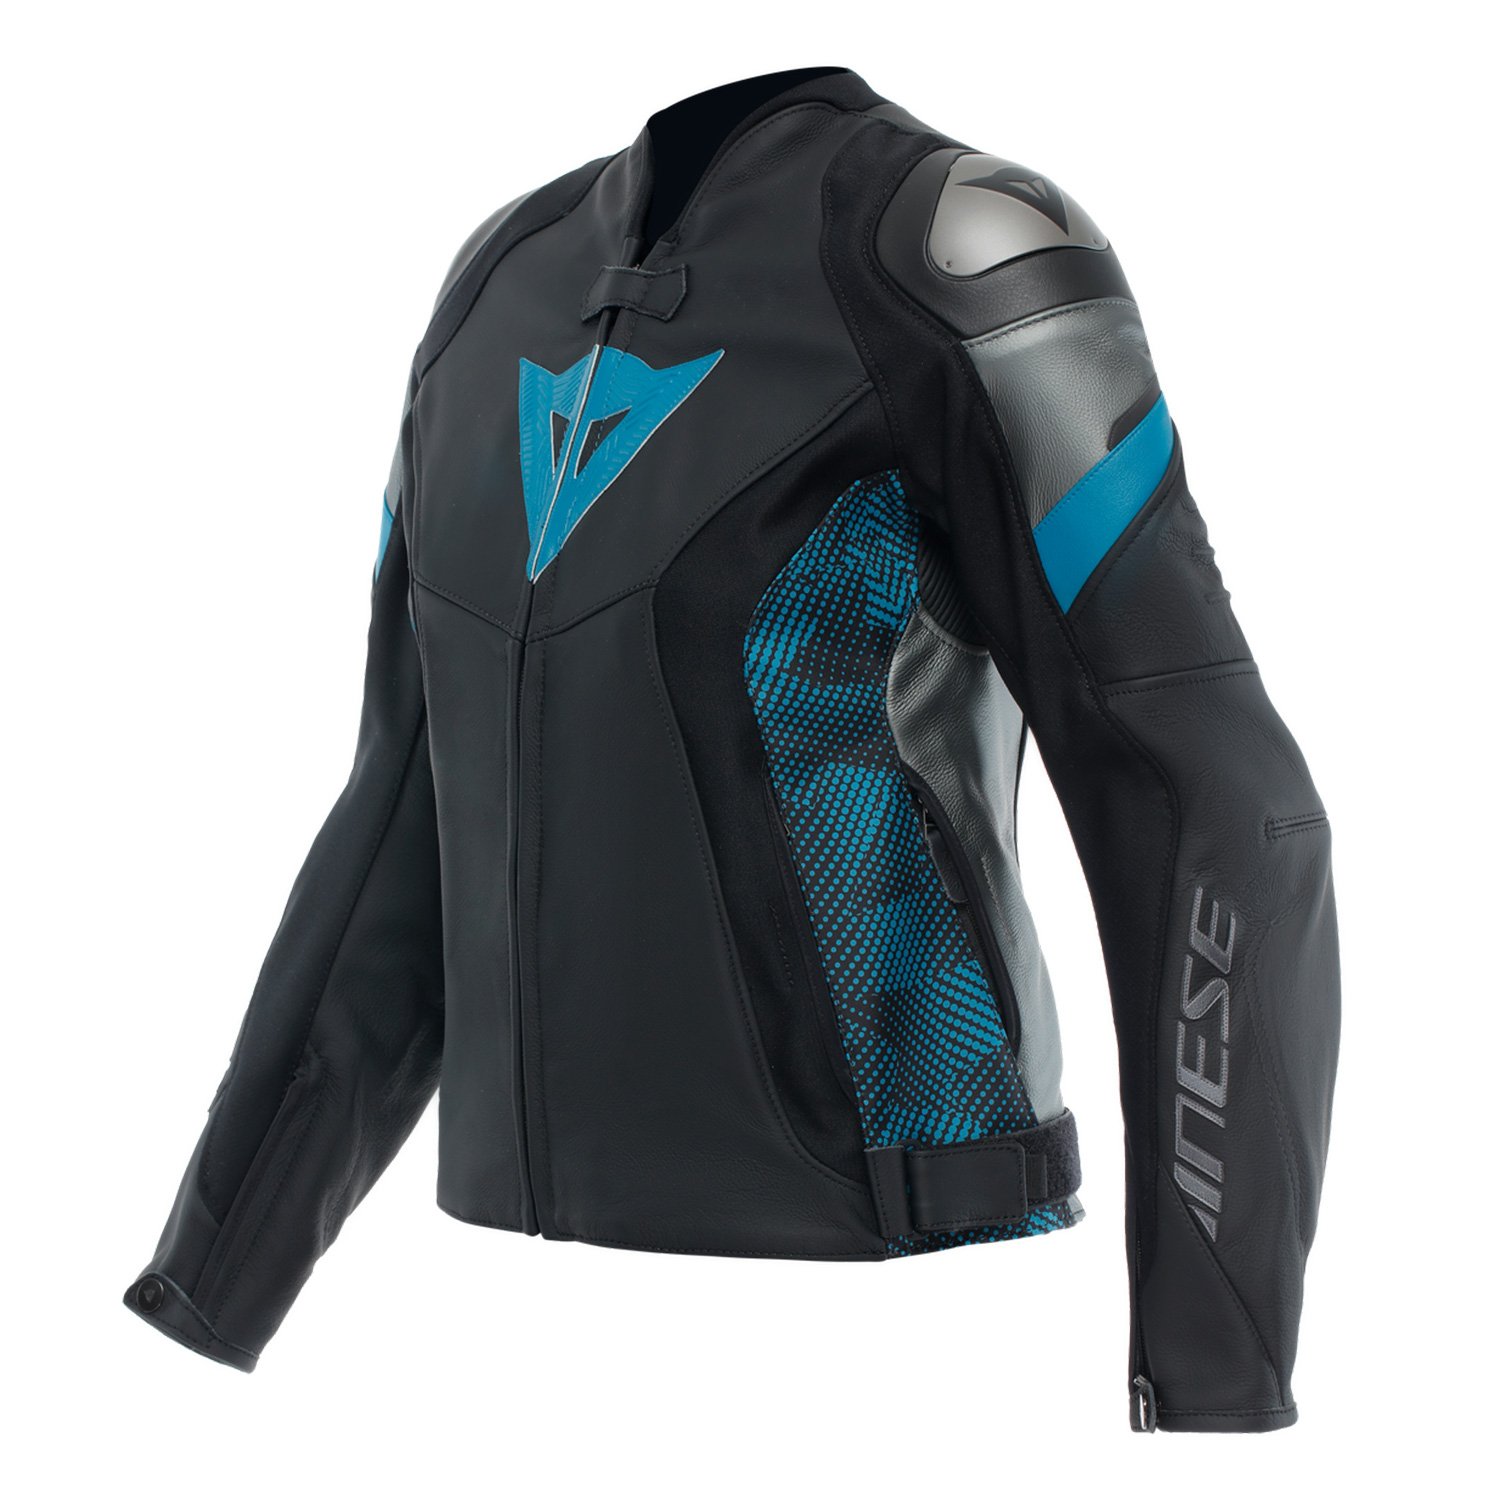 Image of EU Dainese Avro 5 Leather Jacket WMN Black Teal Anthracite Taille 38